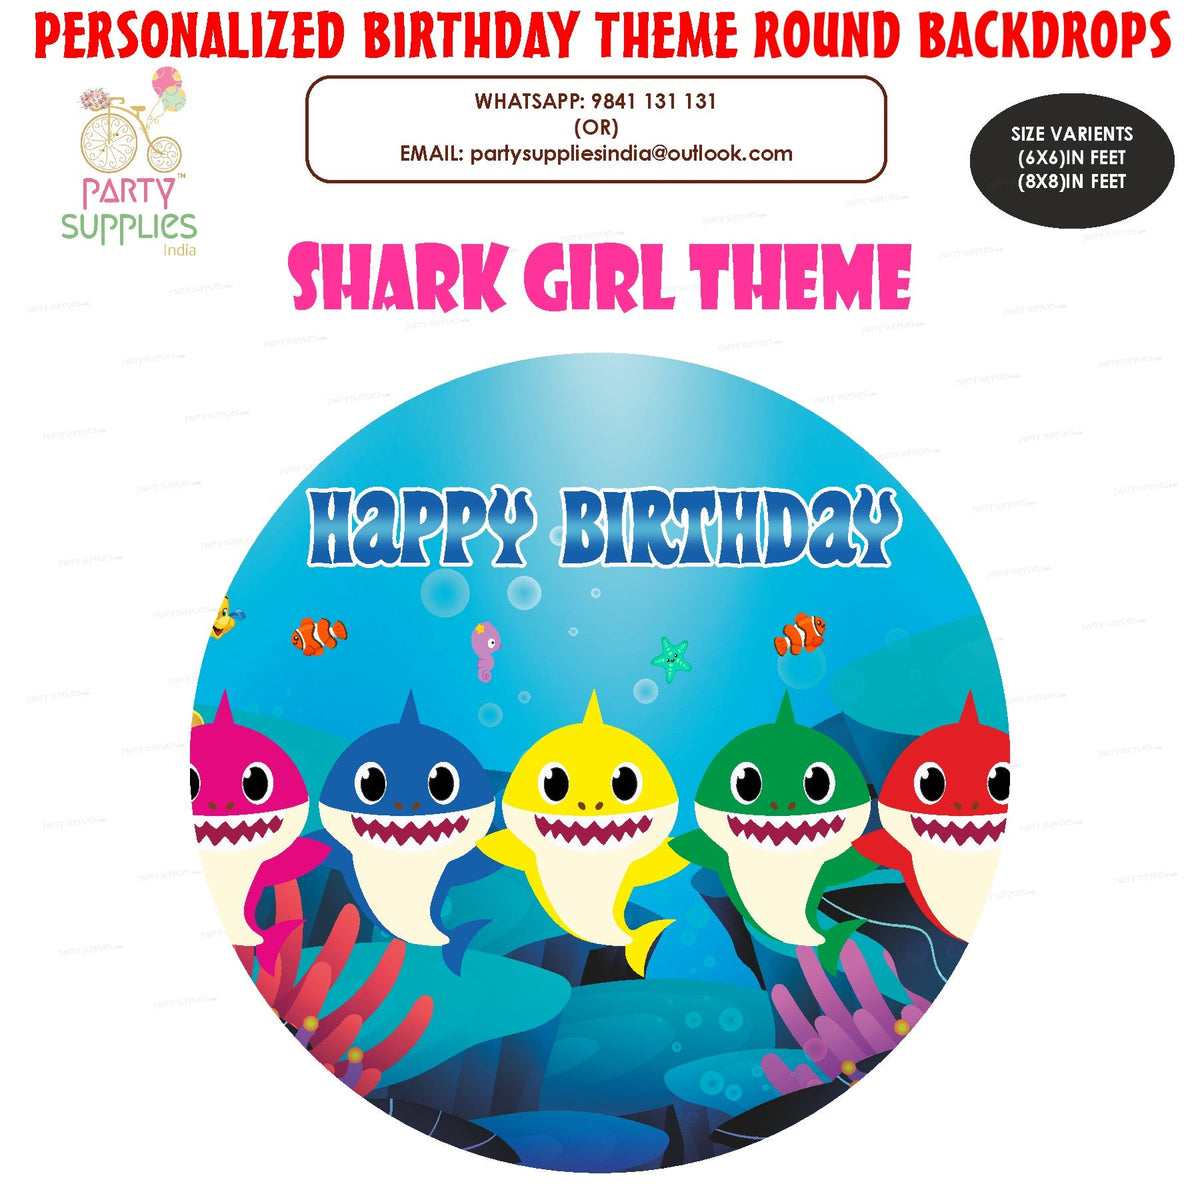 Shark Girl Personalized Round Backdrop